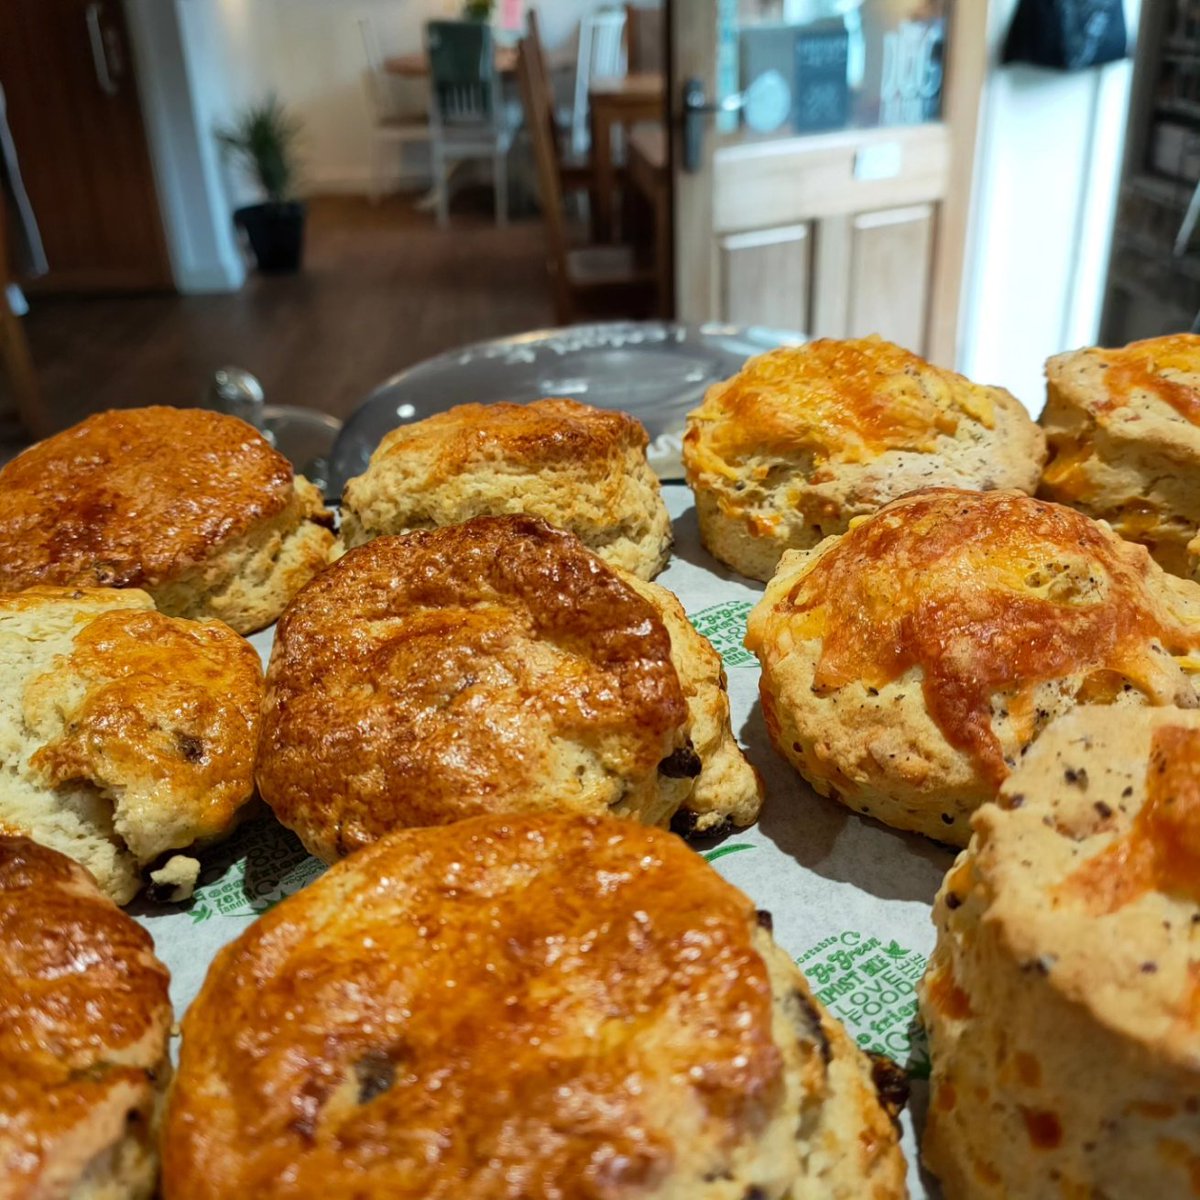 Today is National Scone Day! ...who knew?! #nationalsconeday #thejoinersshop #coffeeshop #sconesofinstagram #northyorkshire #discoverhambleton